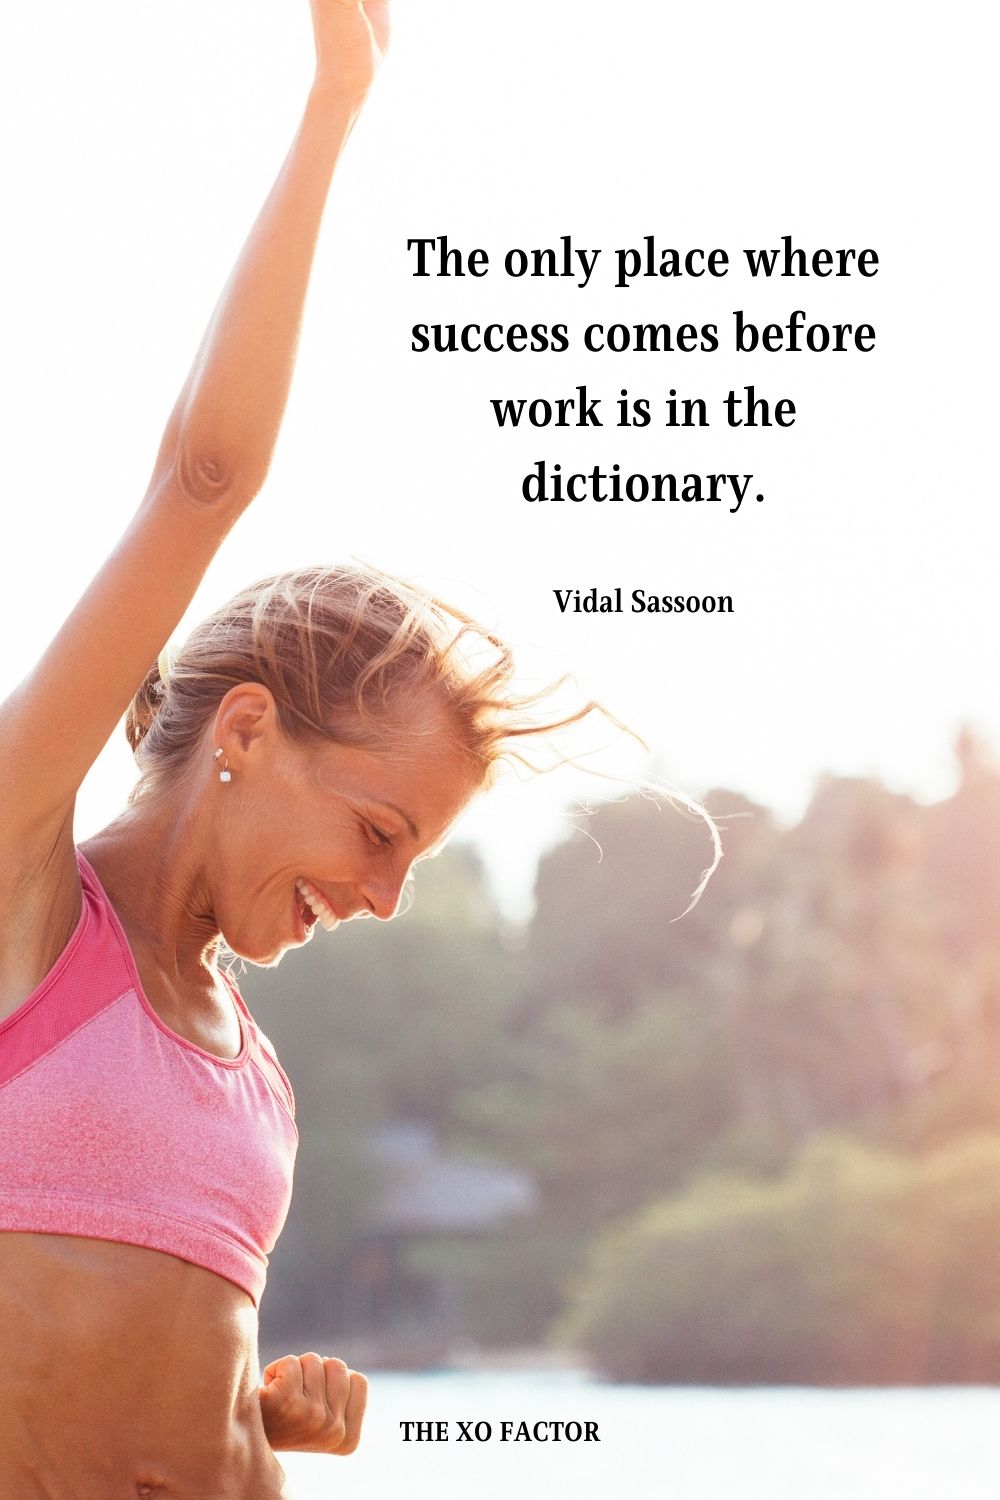 The only place where success comes before work is in the dictionary. Vidal Sassoon